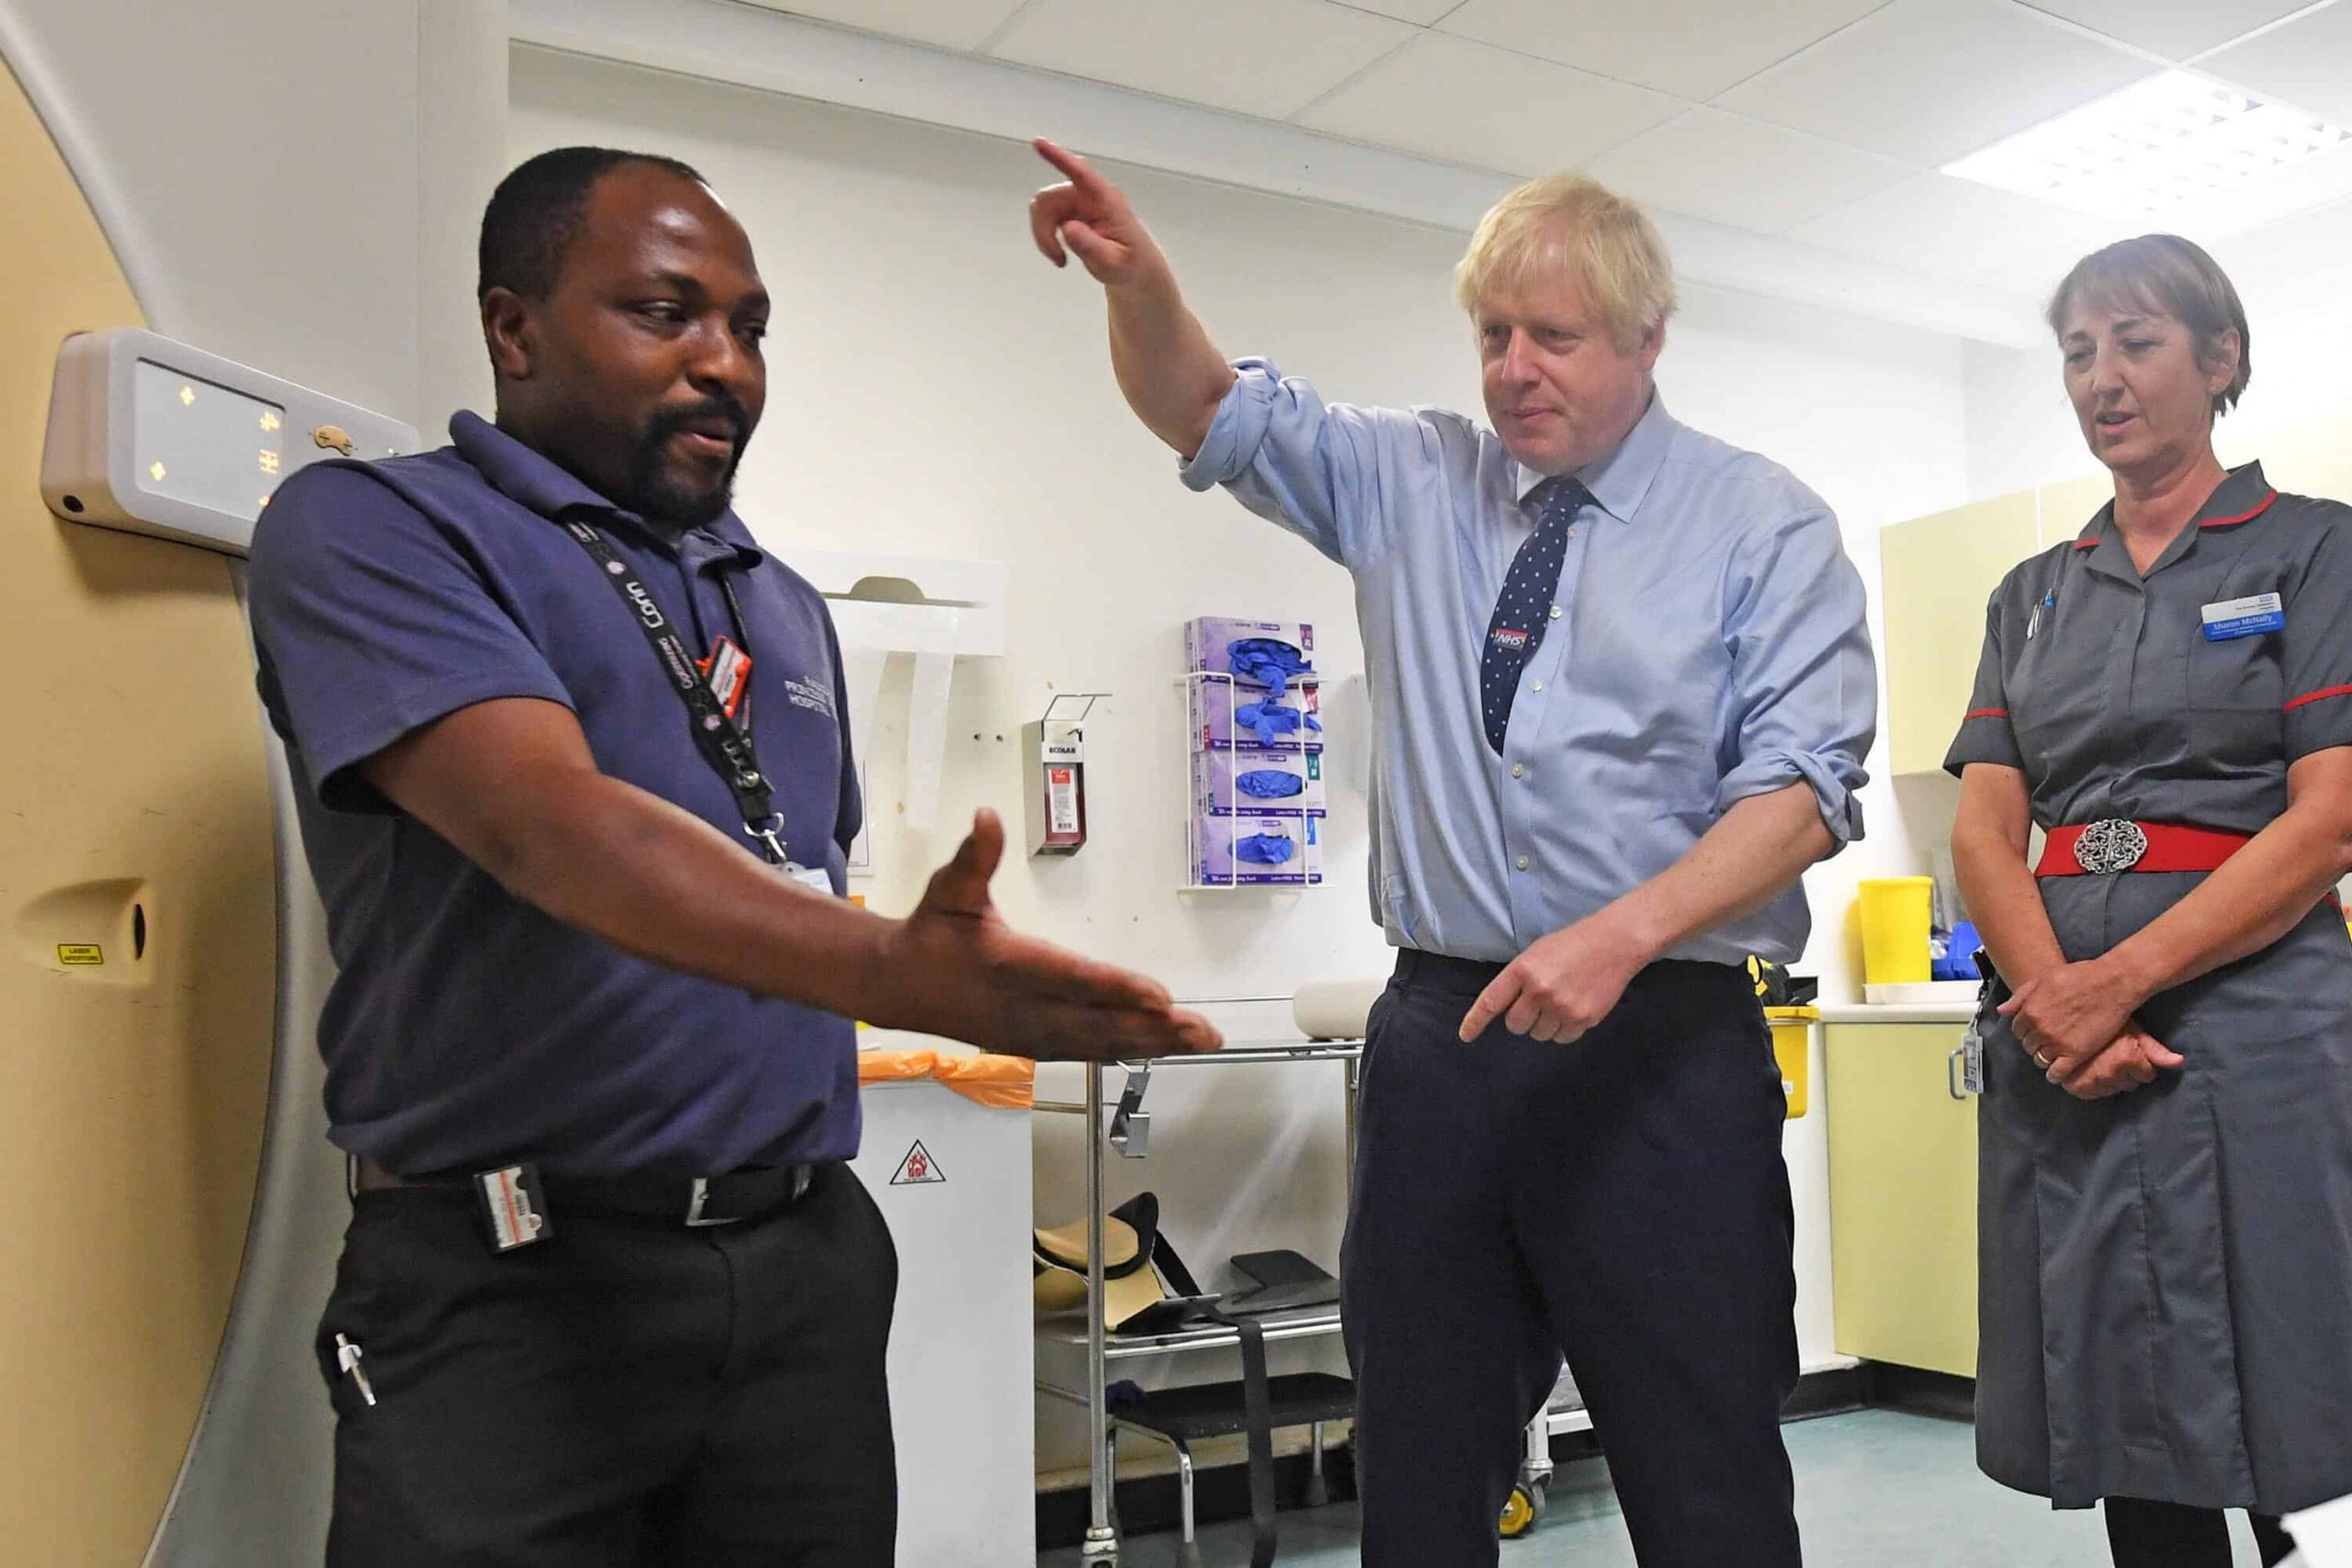 Johnson concedes only 31,000 new nurses will be recruited under Tory plans